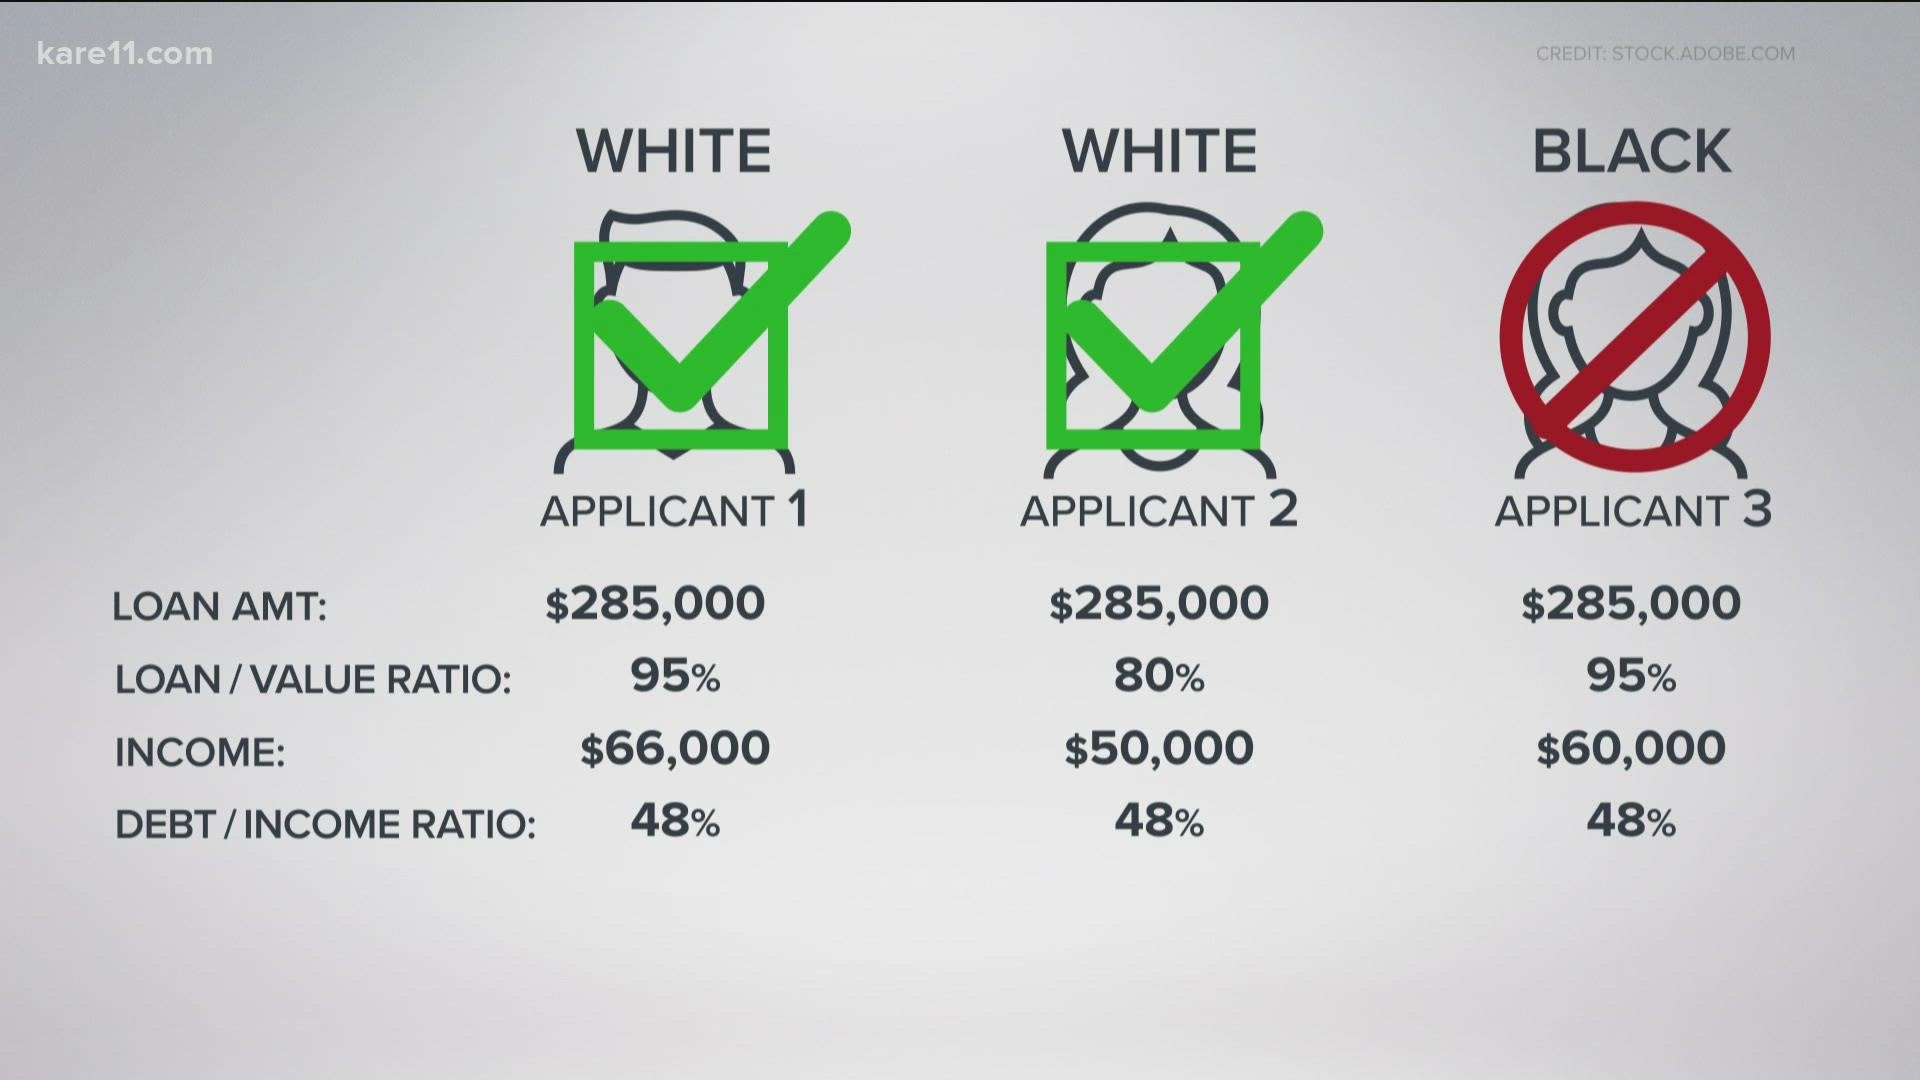 Data analyzed by KARE 11 shows the mortgage approval gap persists even when Black applicants have similar qualifications as white applicants.